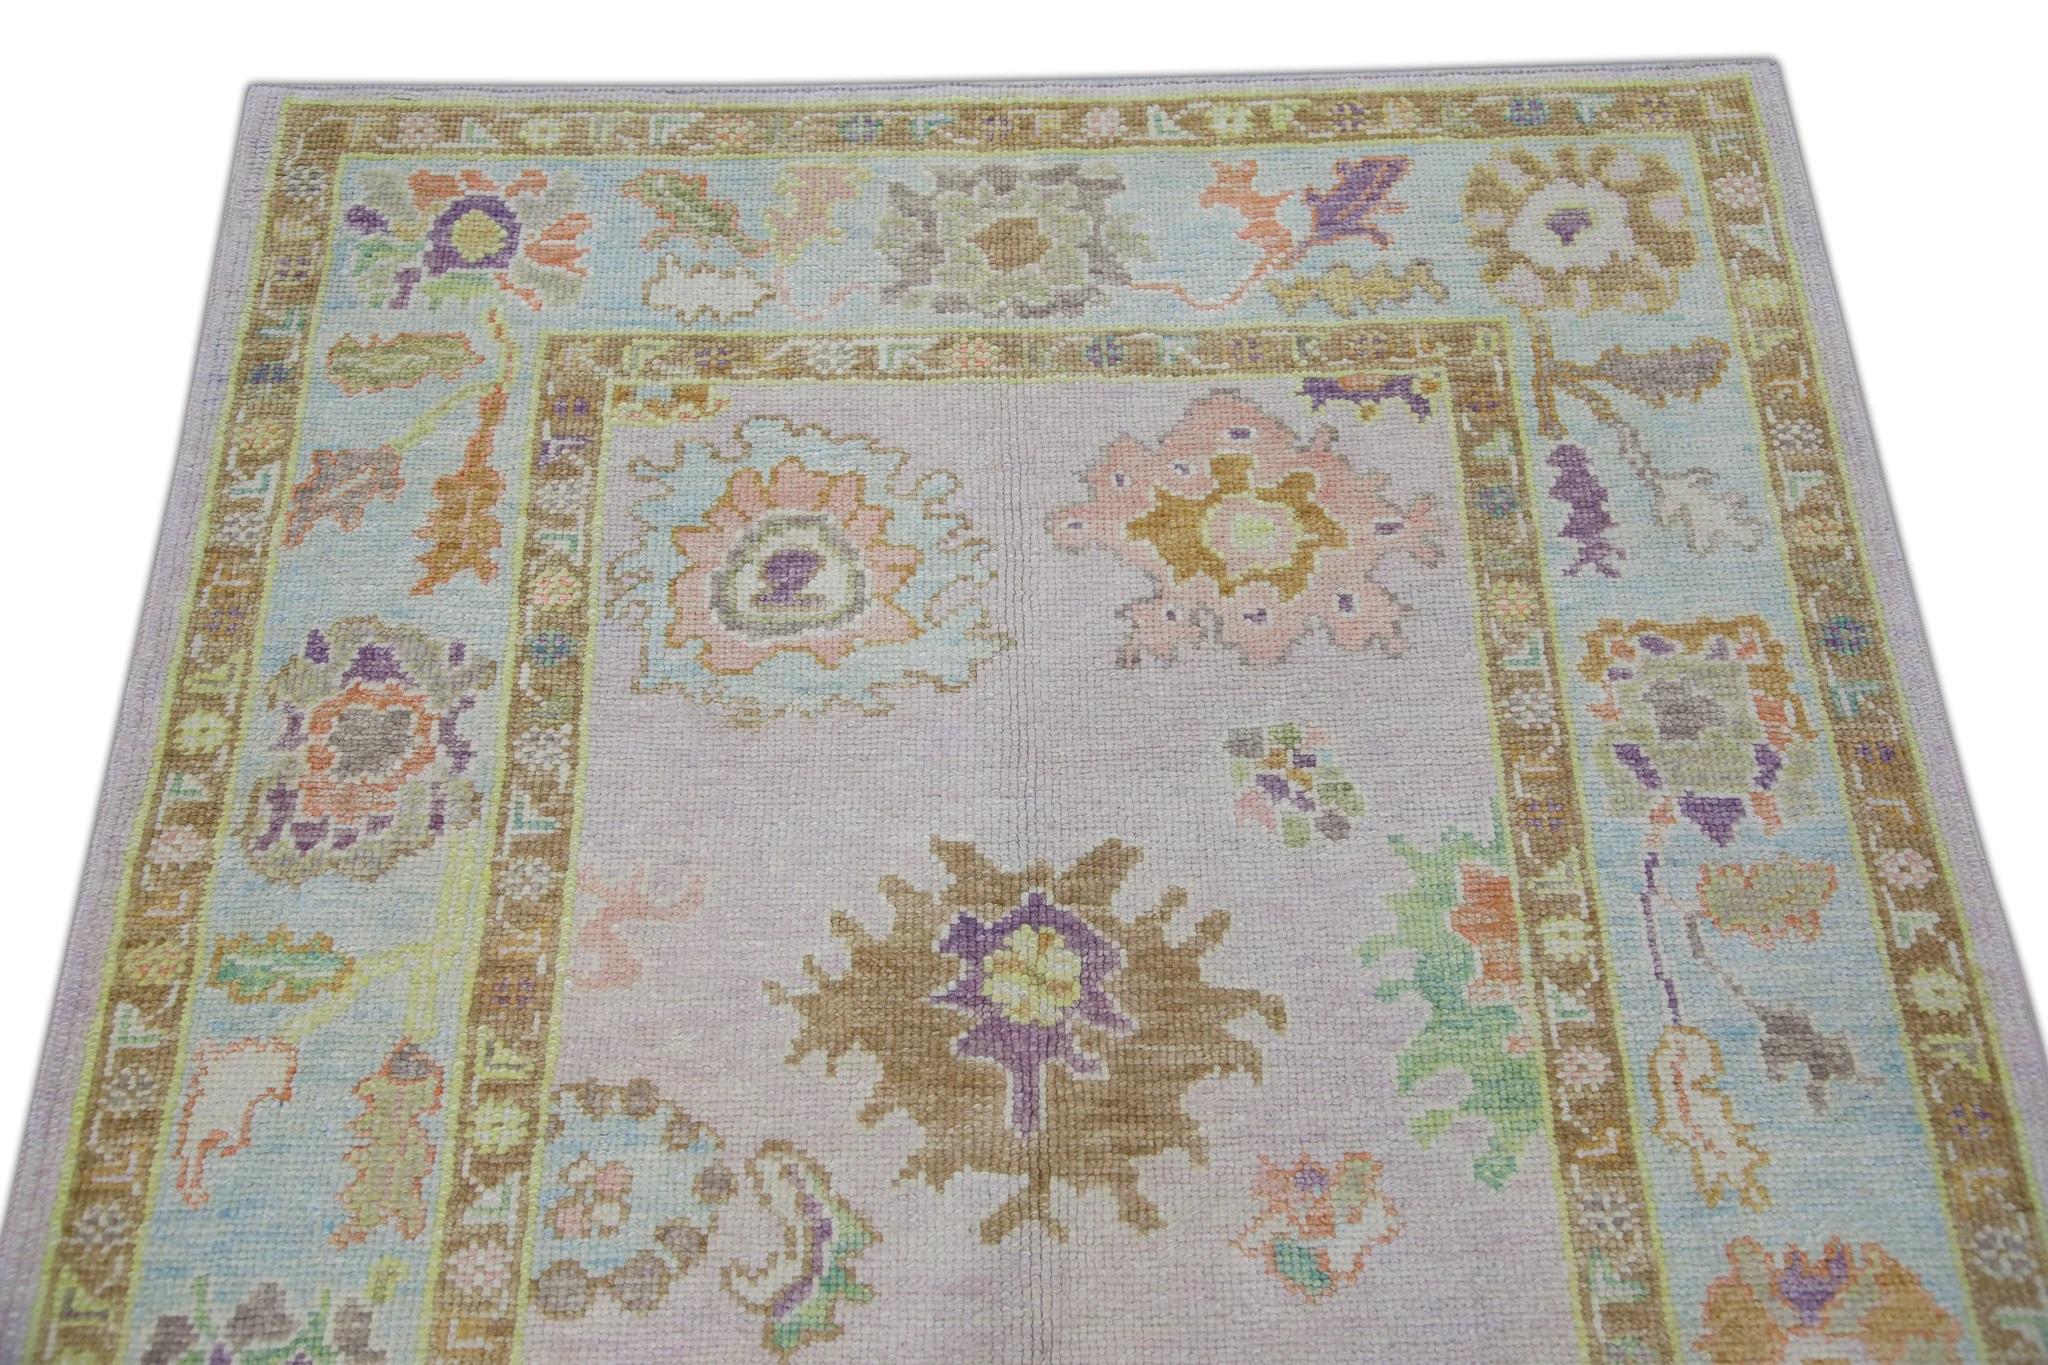 Handwoven Wool Turkish Oushak Rug Lilac Field Multicolor Floral Design 4'2 x 5'7 For Sale 2